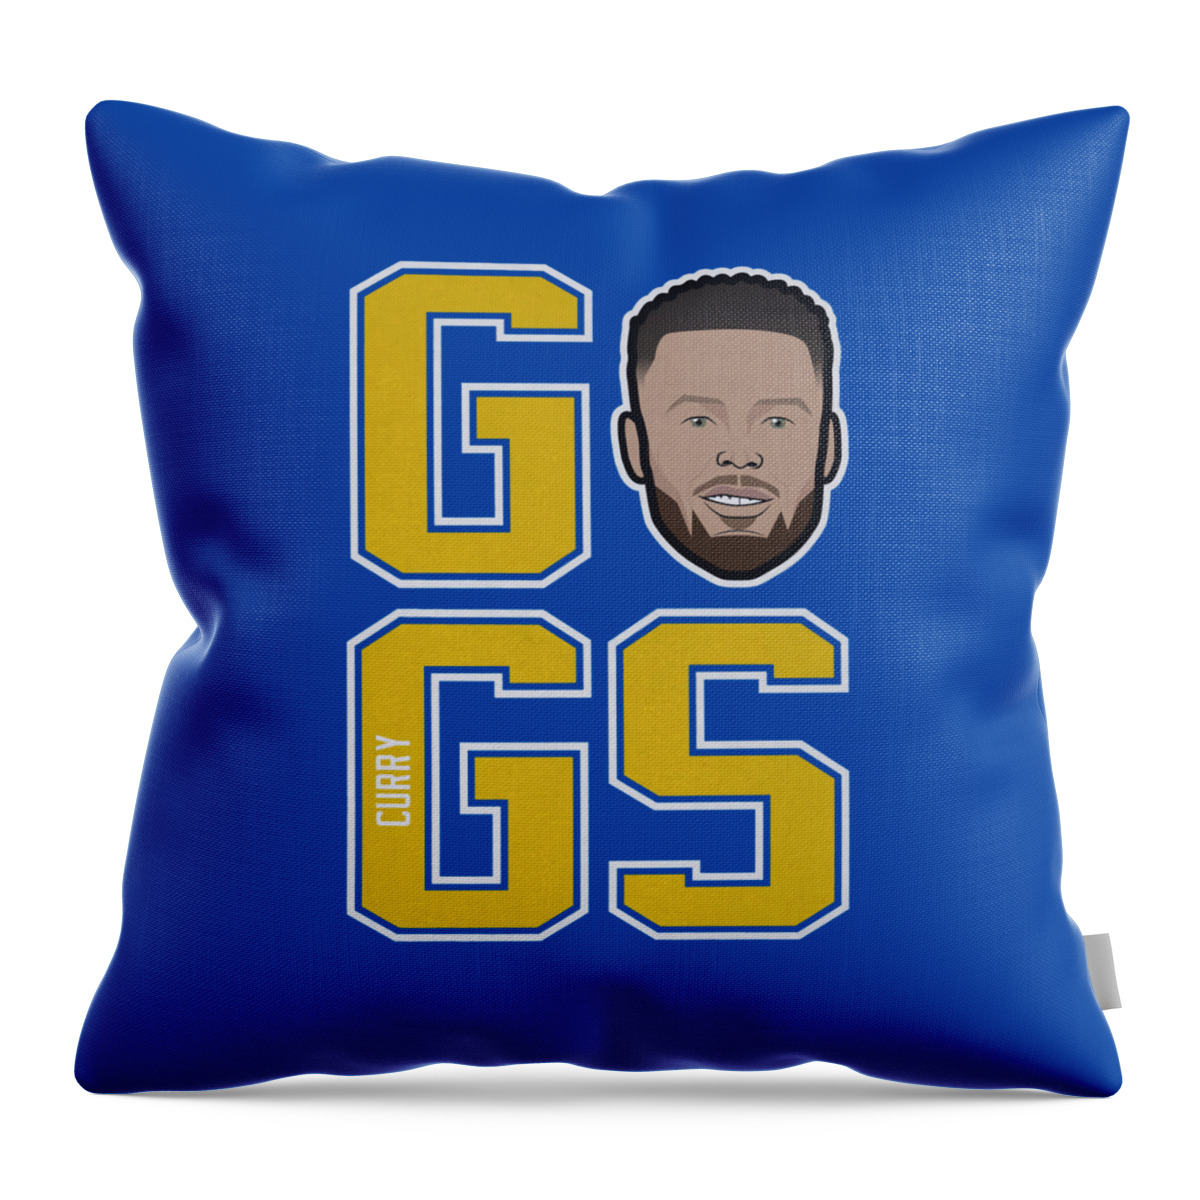 Steph Curry Go Gs Throw Pillow featuring the digital art Steph Curry GO GS by Kelvin Kent